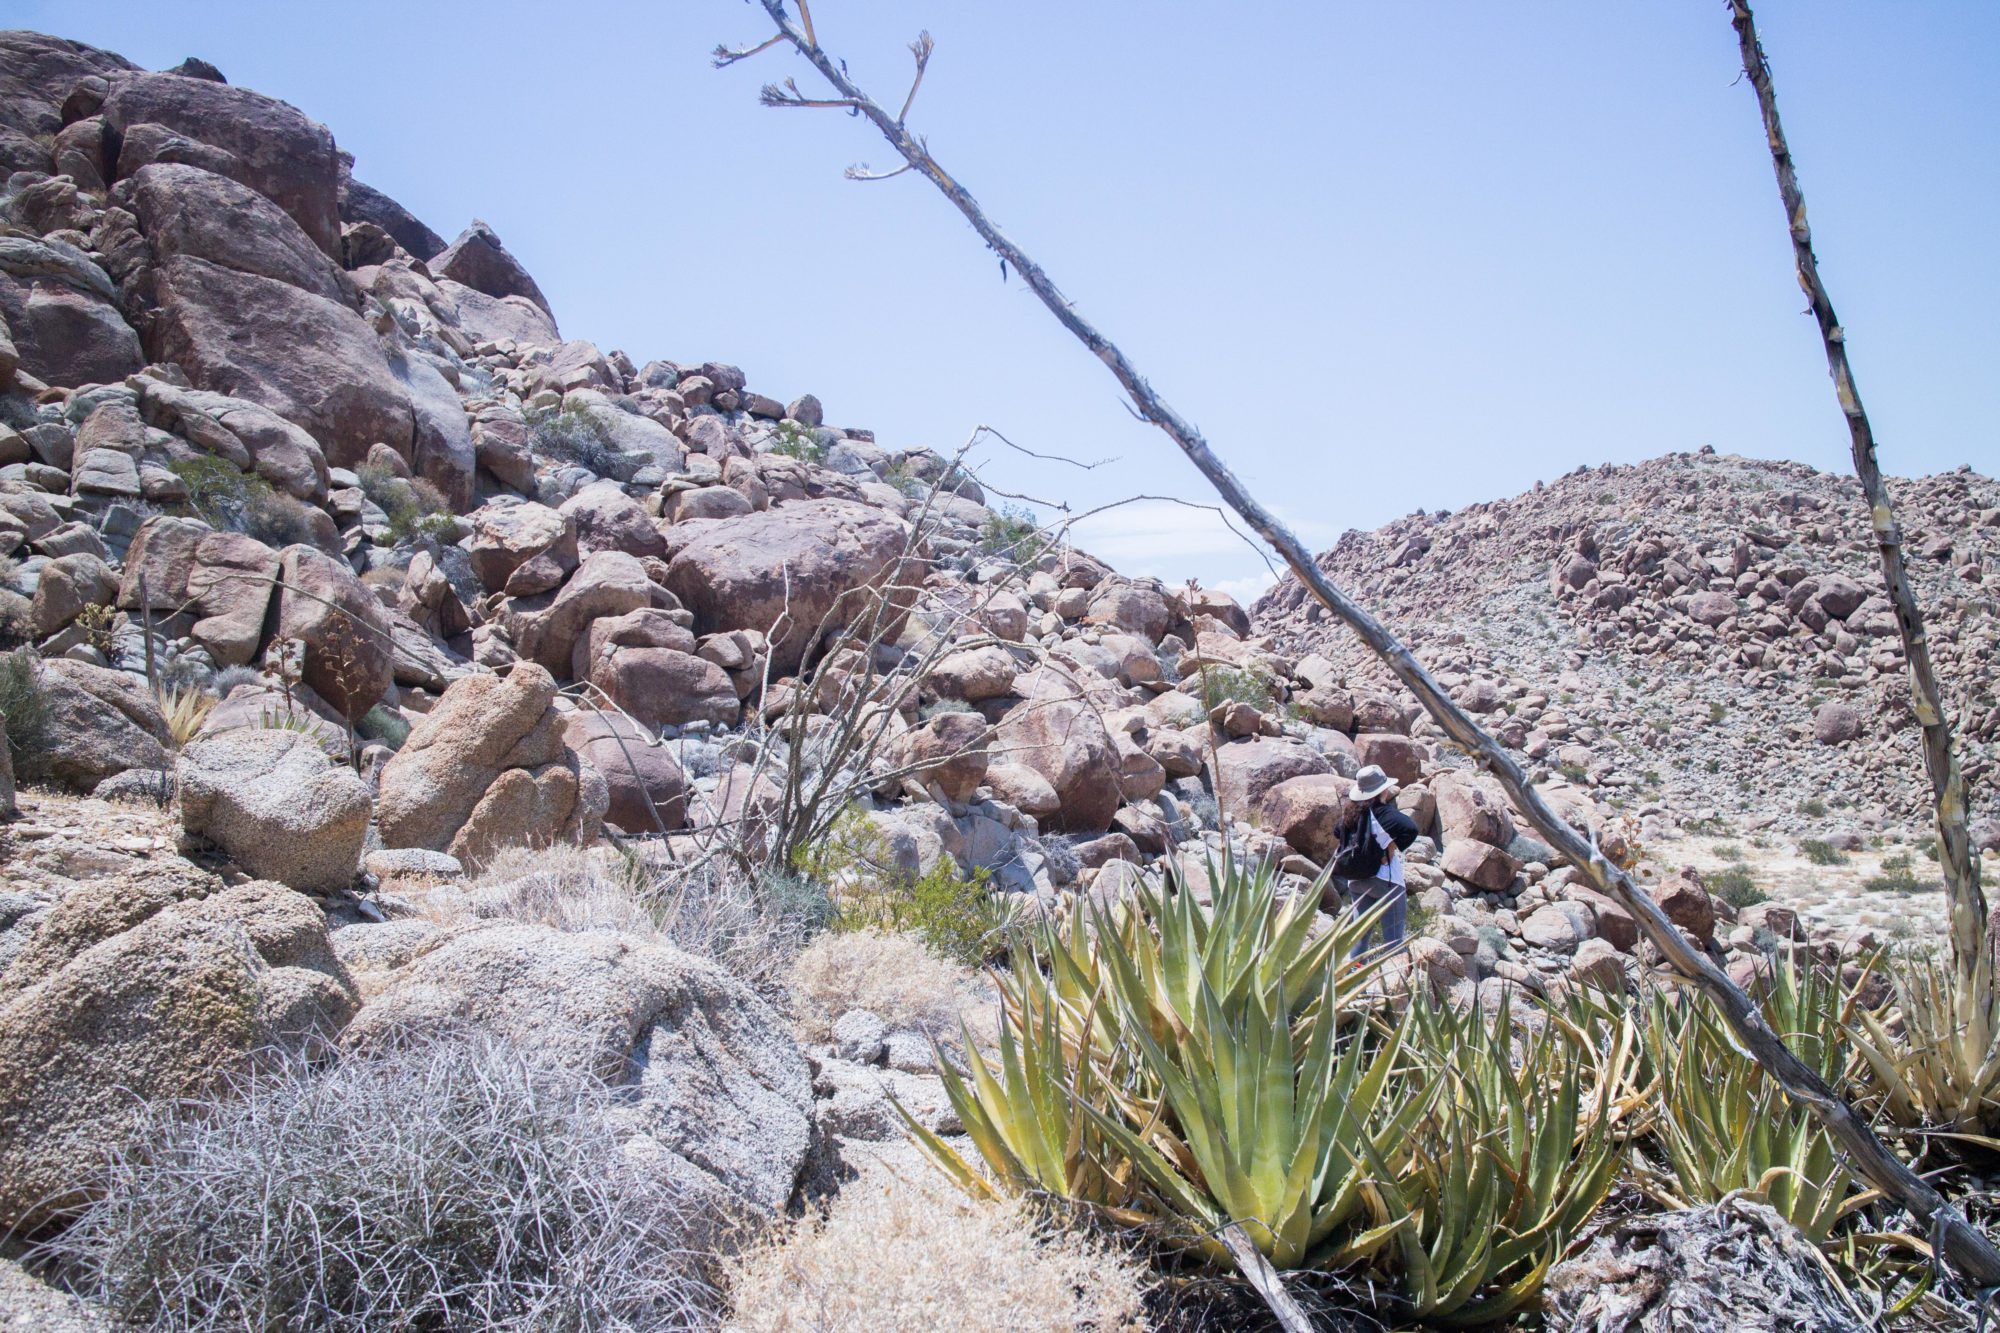 Photos of Trash in the Arizona Desert Left Behind by ‘Illegal Immigrants’?